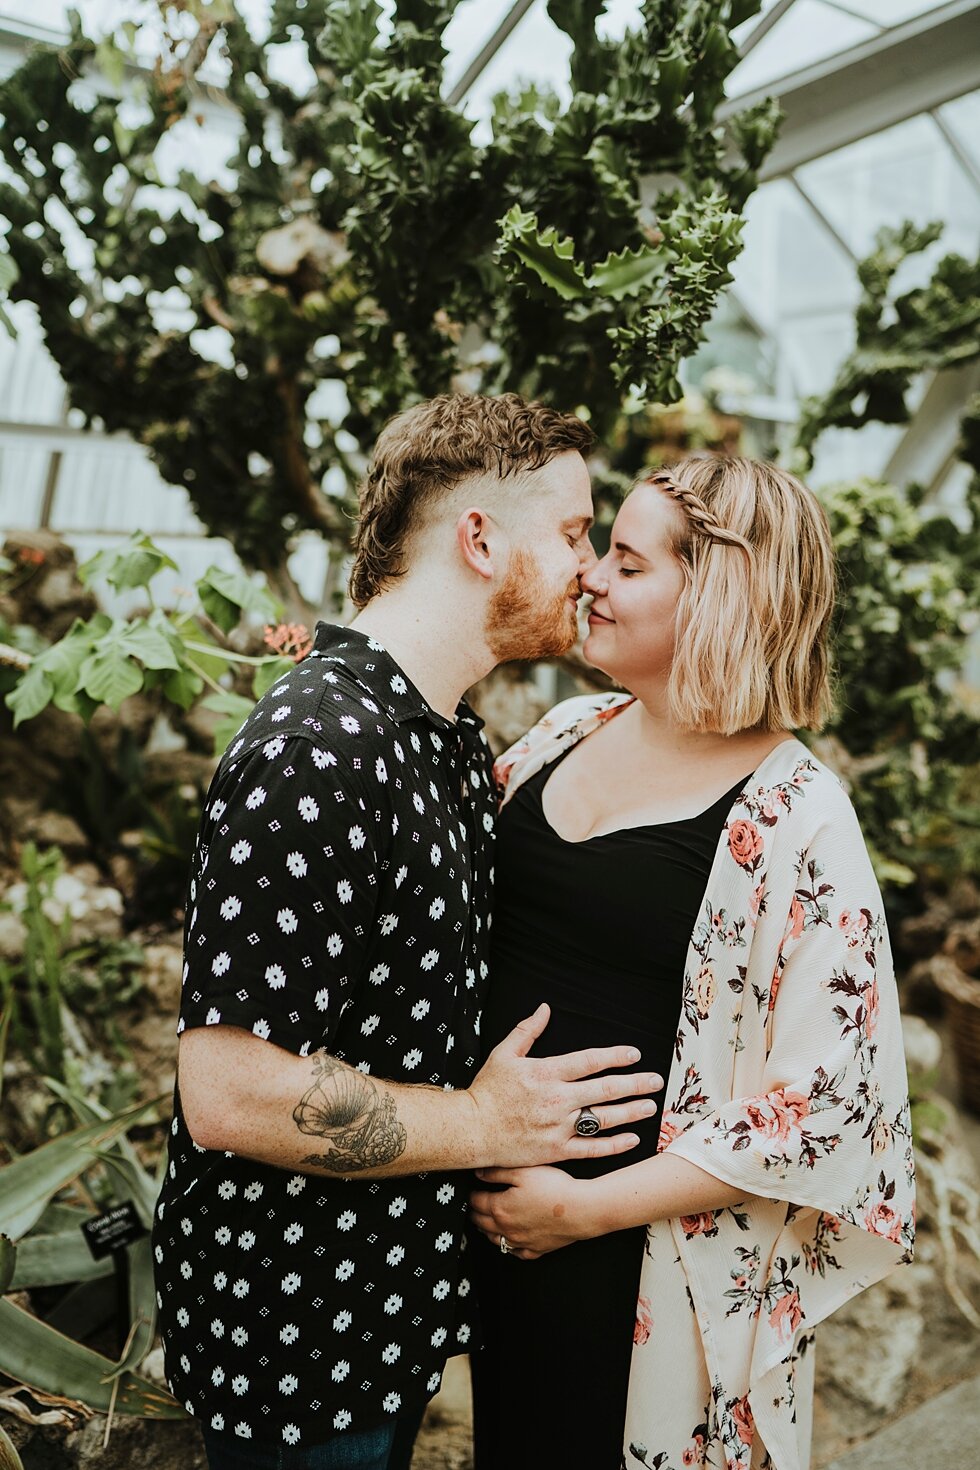  A kiss between these soon to be parents at Krohn Conservatory surrounded by foliage #maternitygoals #maternityphotographer #babybump #outdoorphotosession #kentuckyphotographer #indianaphotographer #louisvillephotographer #maternityphotos #expectinga